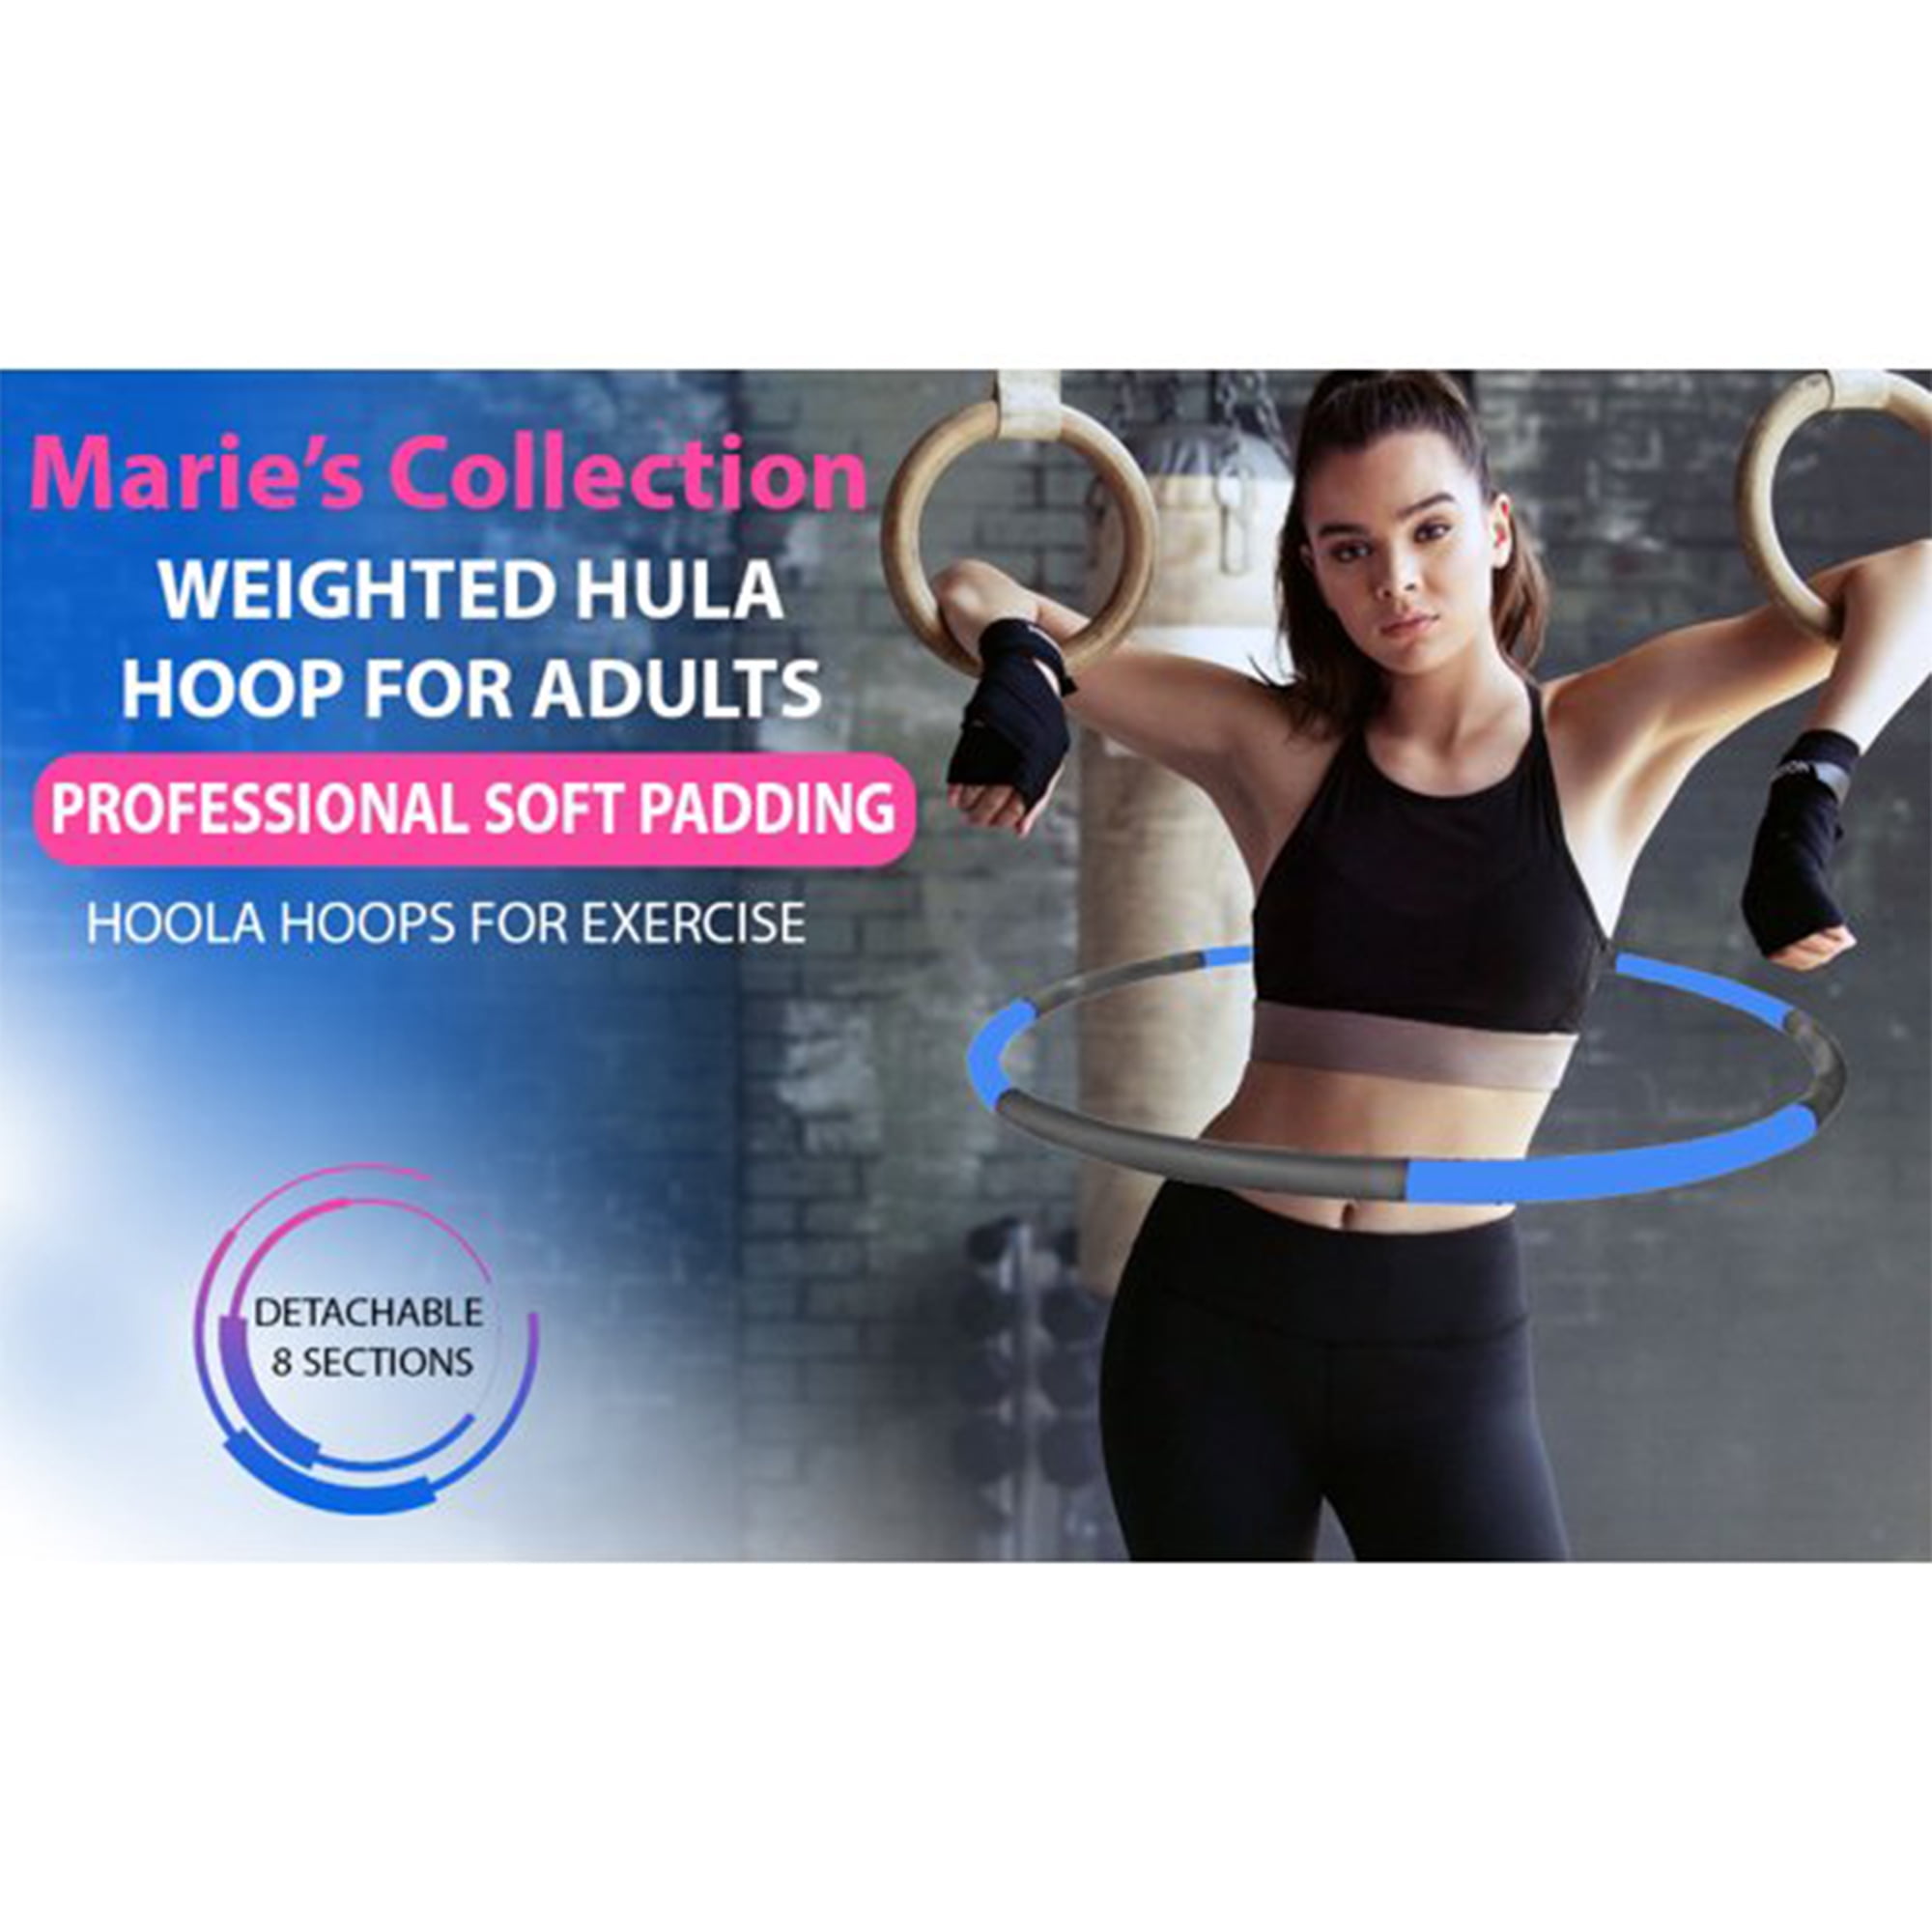 Hoola Hoop Folding Fitness Weighted Hula Hoops 8 Sections for Exercise 